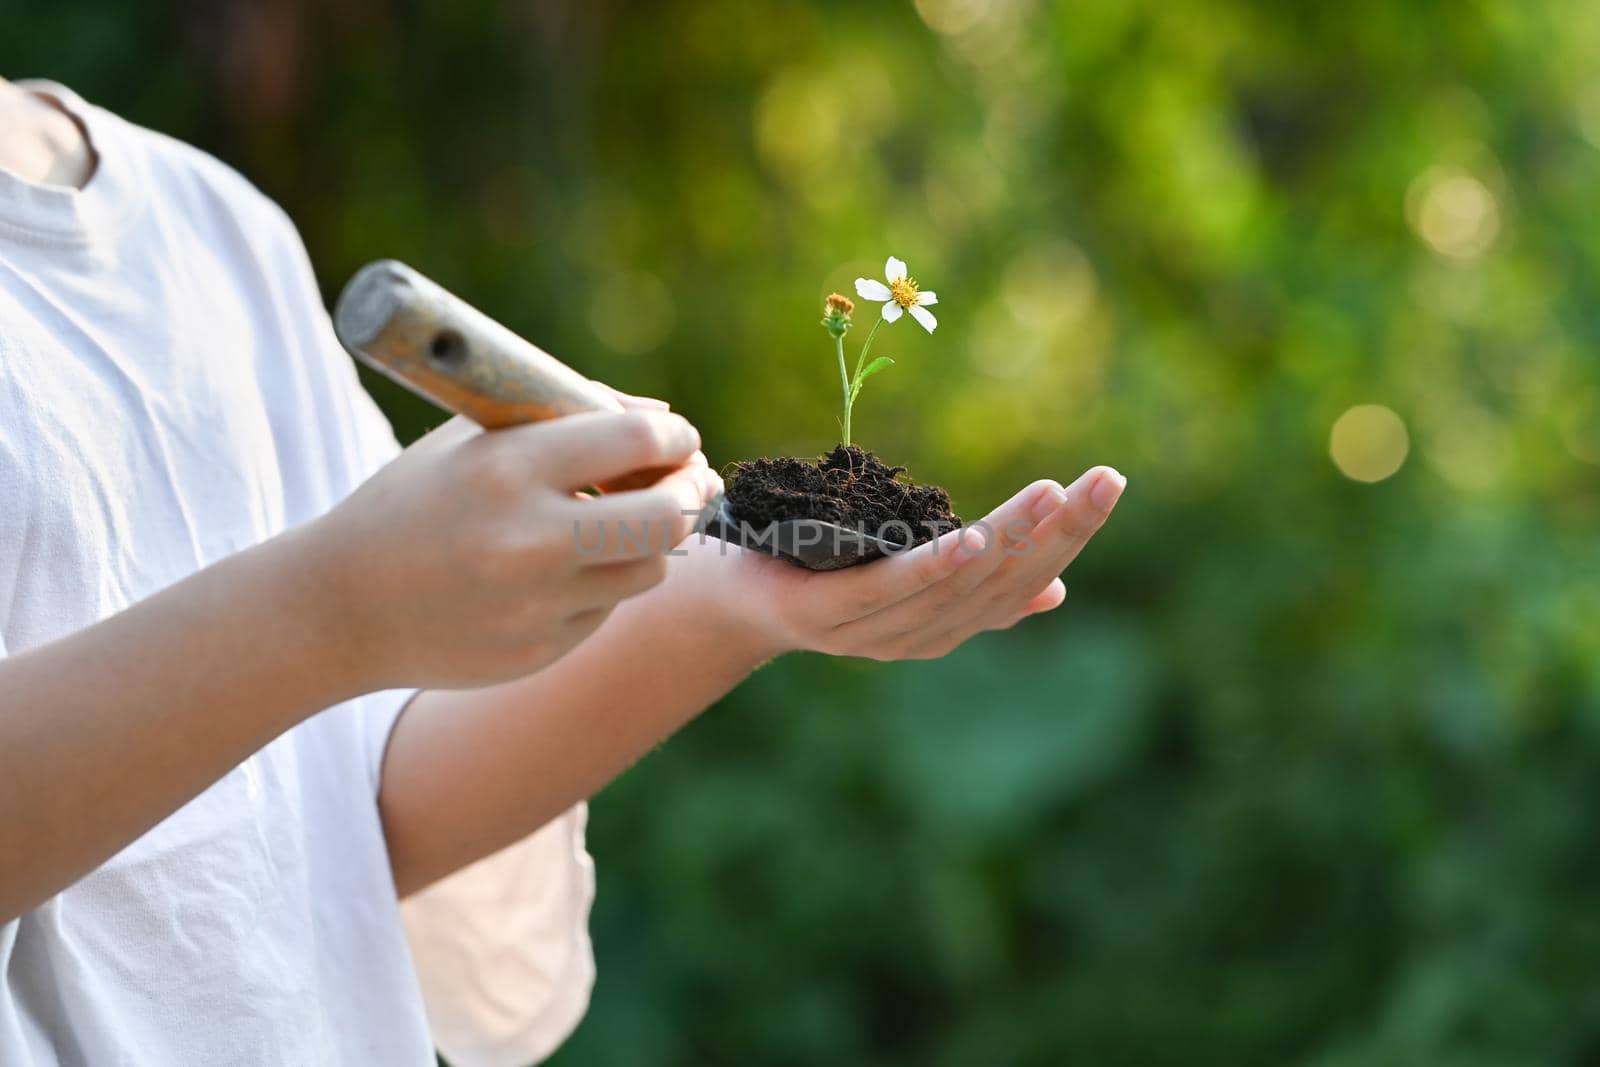 Little girl hand holding garden shovel with plant against blurred green nature background. Concept of saving the world, earth day.